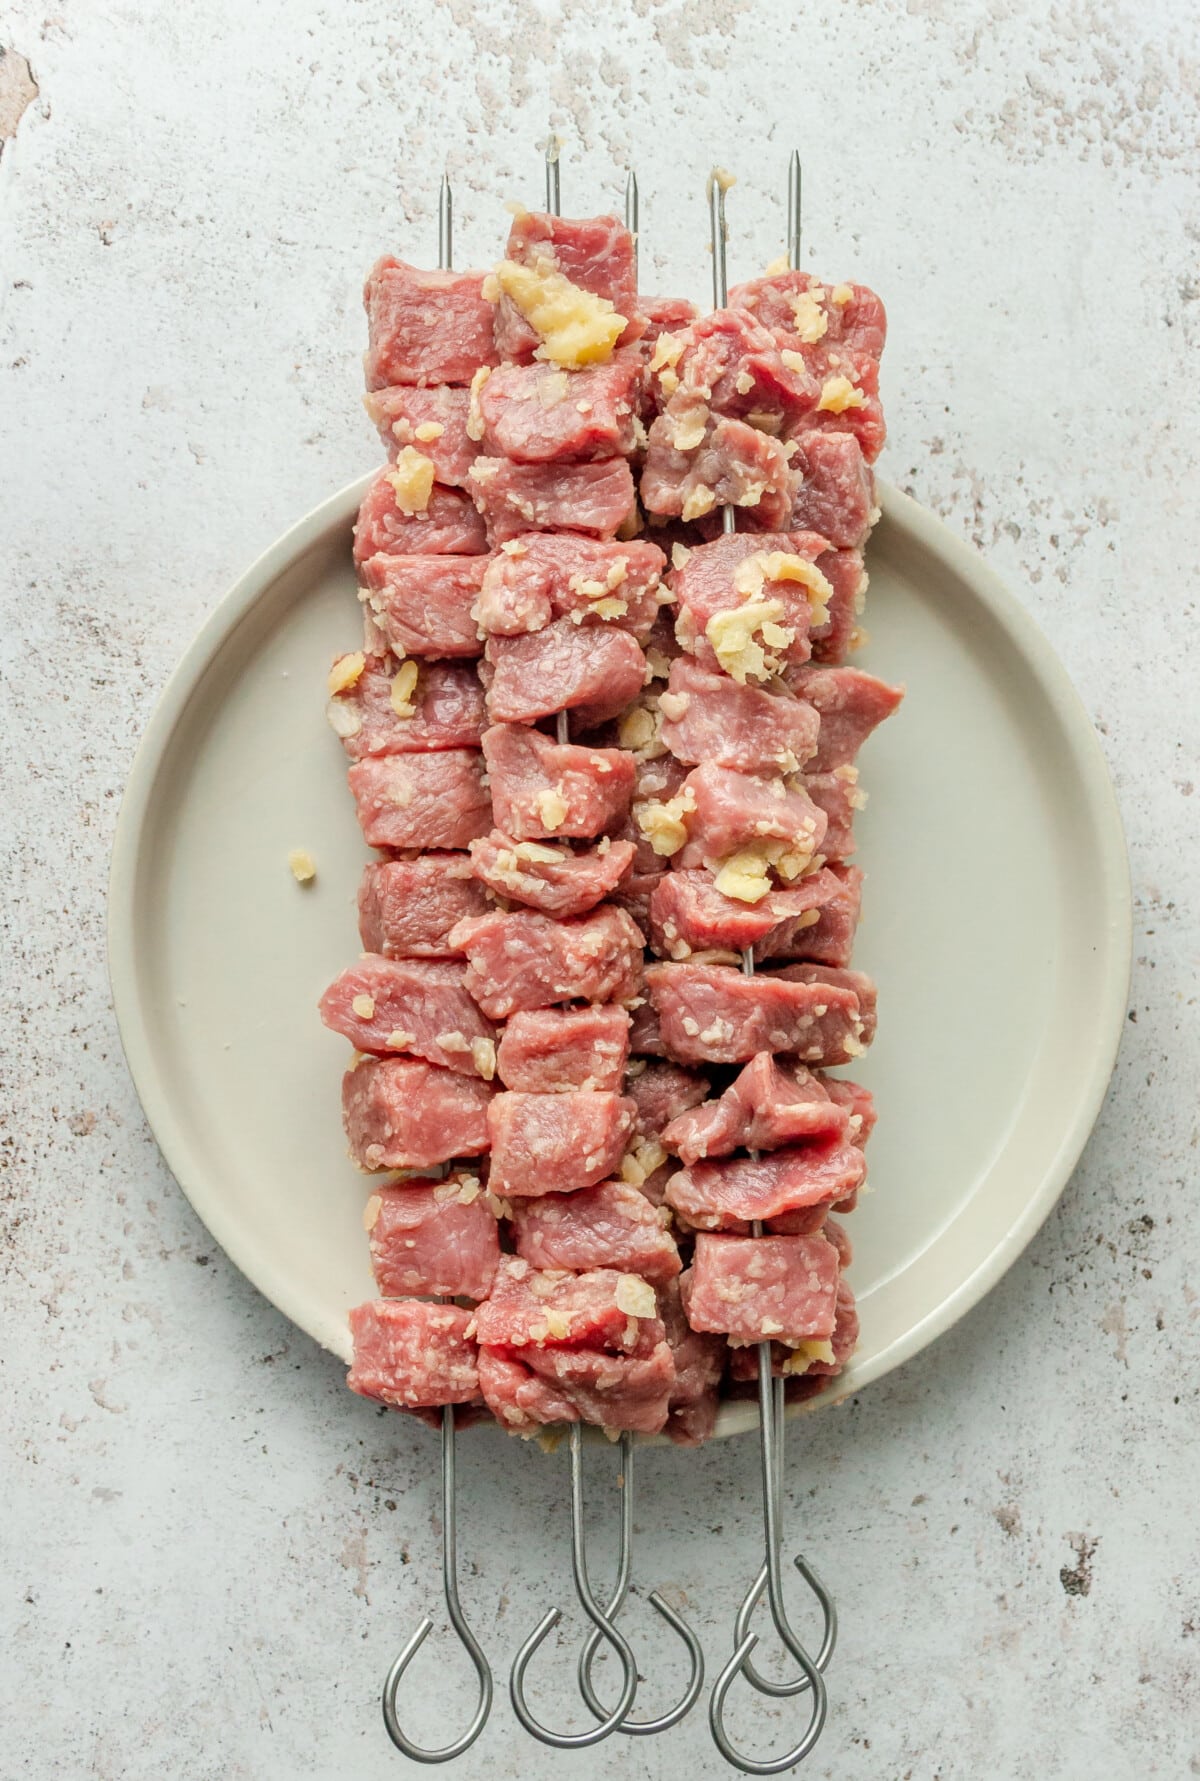 Cubes of steak sit on metal skewers on a plate ready for the grill on a light grey surface.